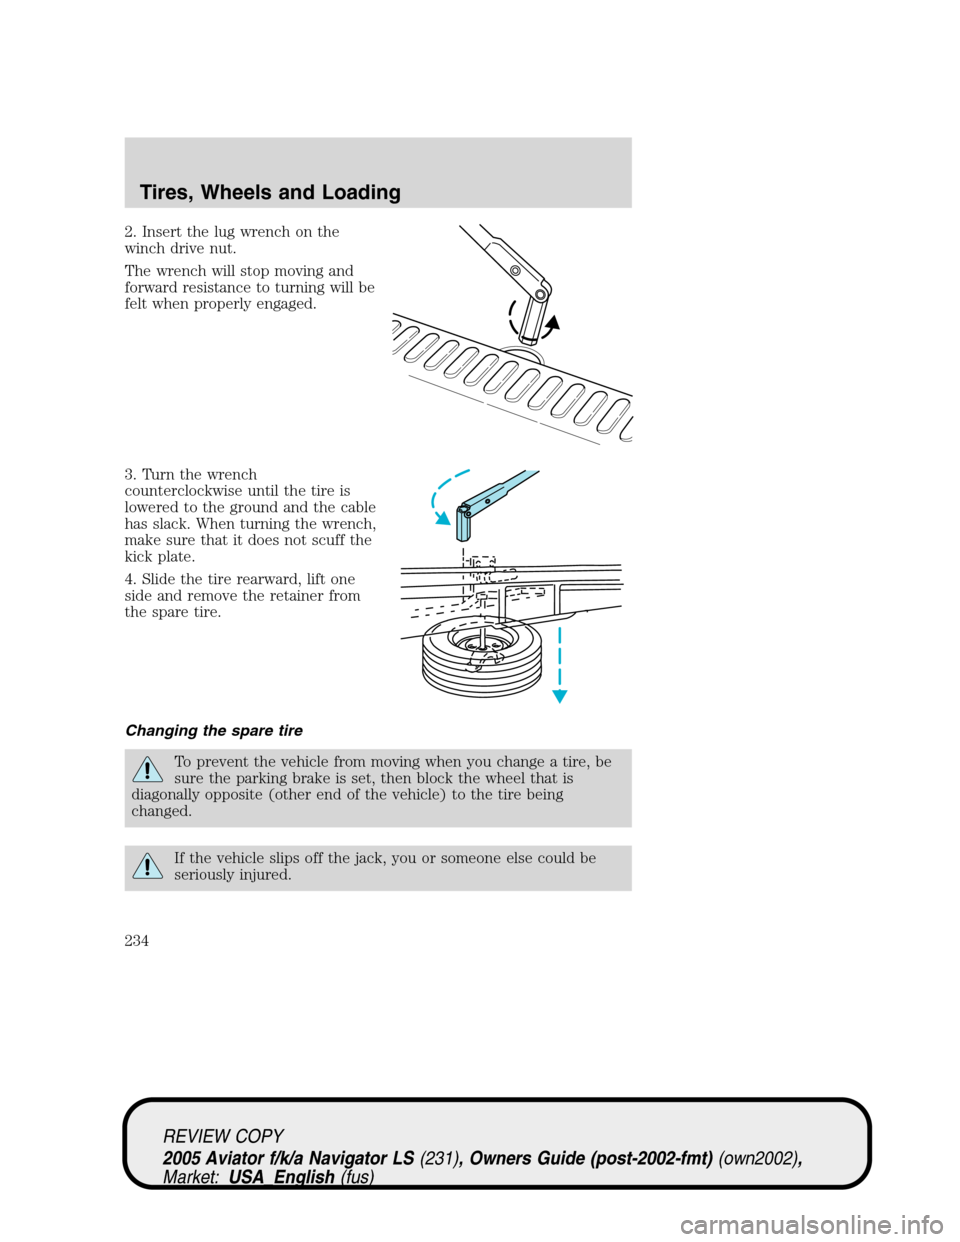 LINCOLN AVIATOR 2005  Owners Manual 2. Insert the lug wrench on the
winch drive nut.
The wrench will stop moving and
forward resistance to turning will be
felt when properly engaged.
3. Turn the wrench
counterclockwise until the tire is